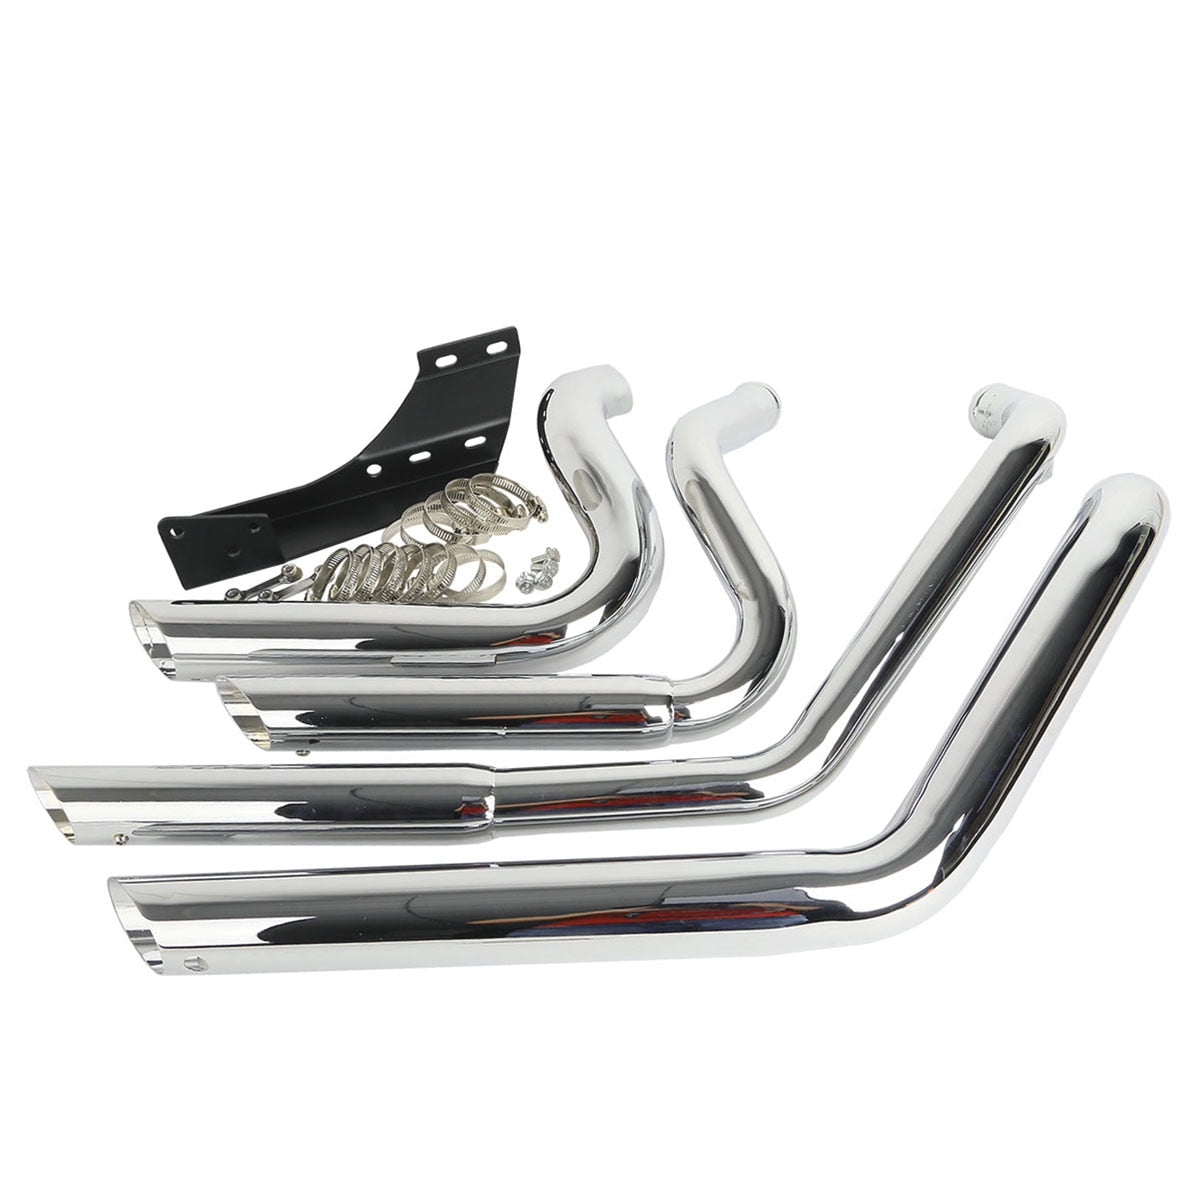 Voodoo Cycle House Custom Staggered Short Shot Motorcycle Exhaust Pipes For 2004-2013 Harley-Davidson Sportster XL Iron 883 1200